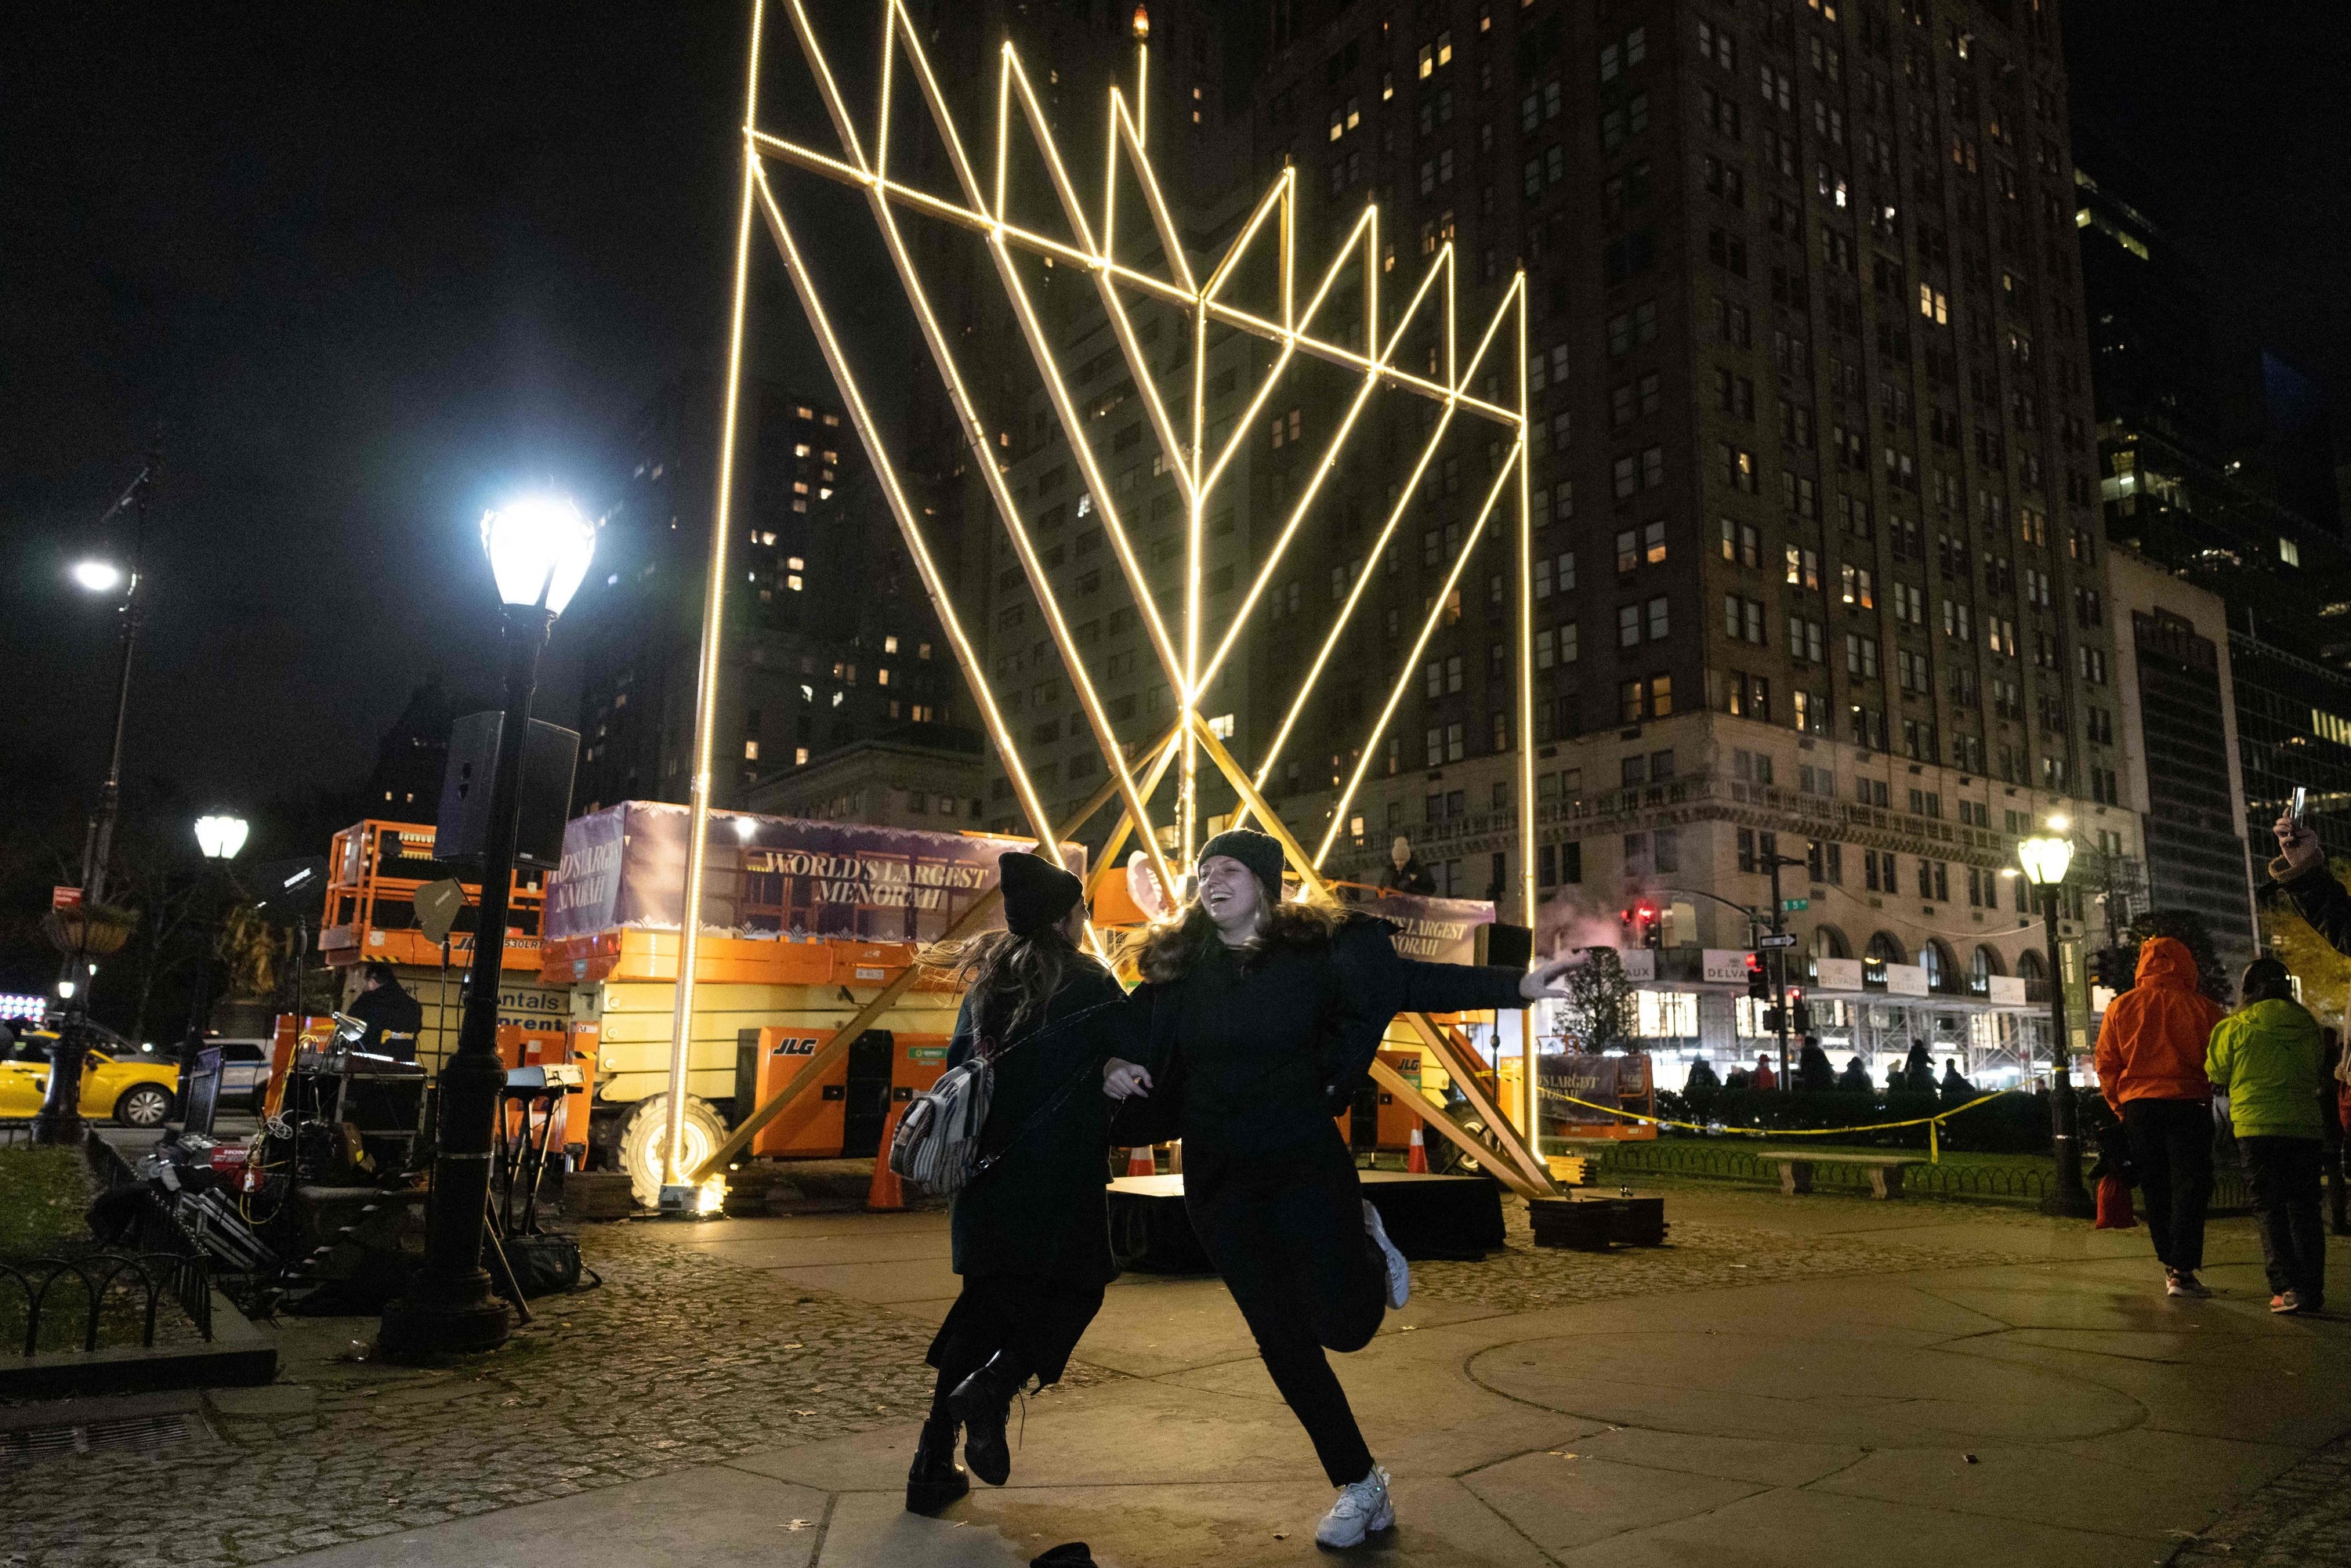 Two women dance outside a large menorah in brooklyn at night